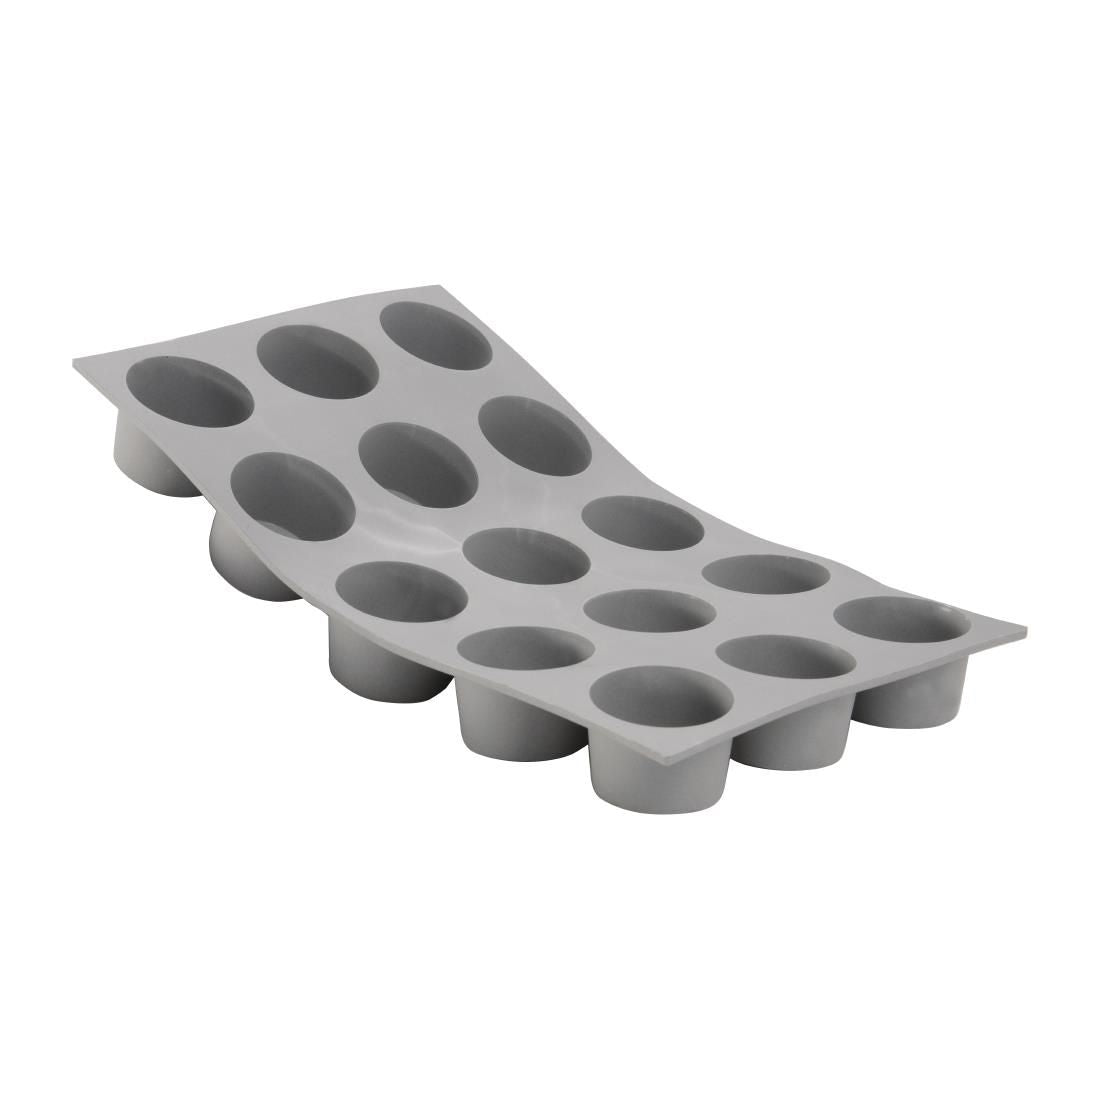 DR487 DeBuyer Elastomoule Silicone Mould Mini Muffins 15 Cup JD Catering Equipment Solutions Ltd